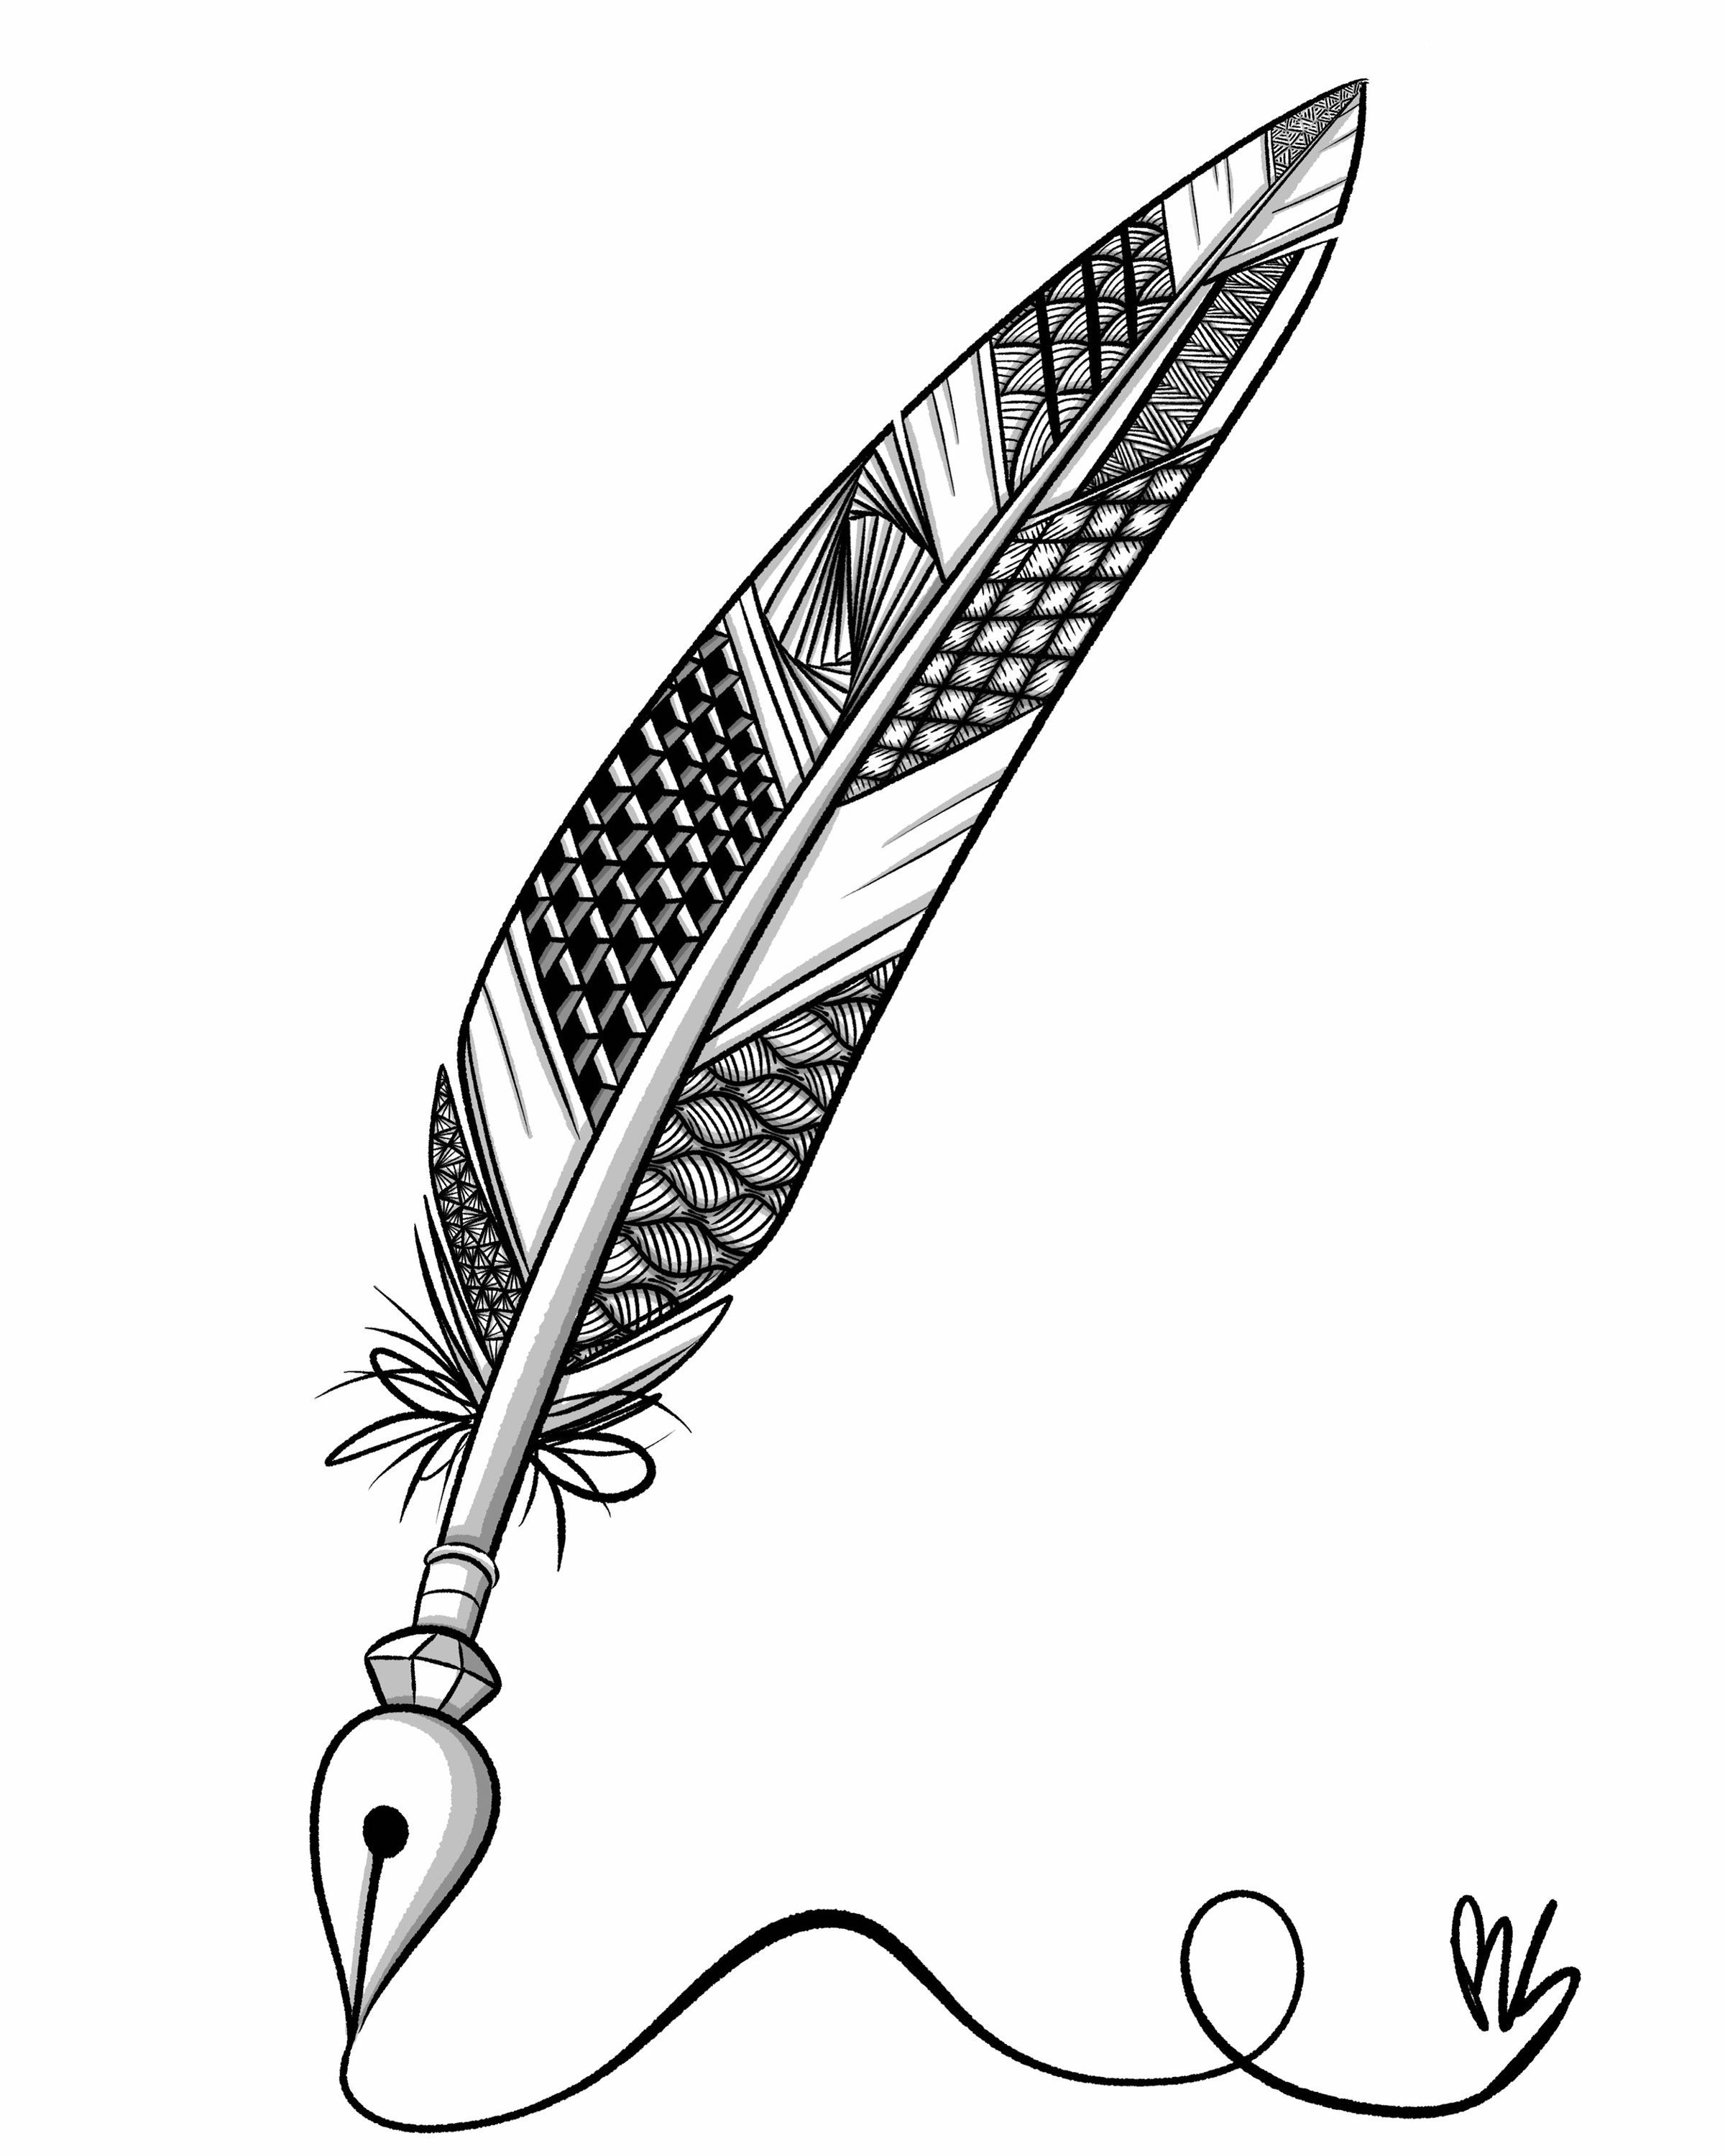 Feather Quill Pen Illustration Art Print/poster 